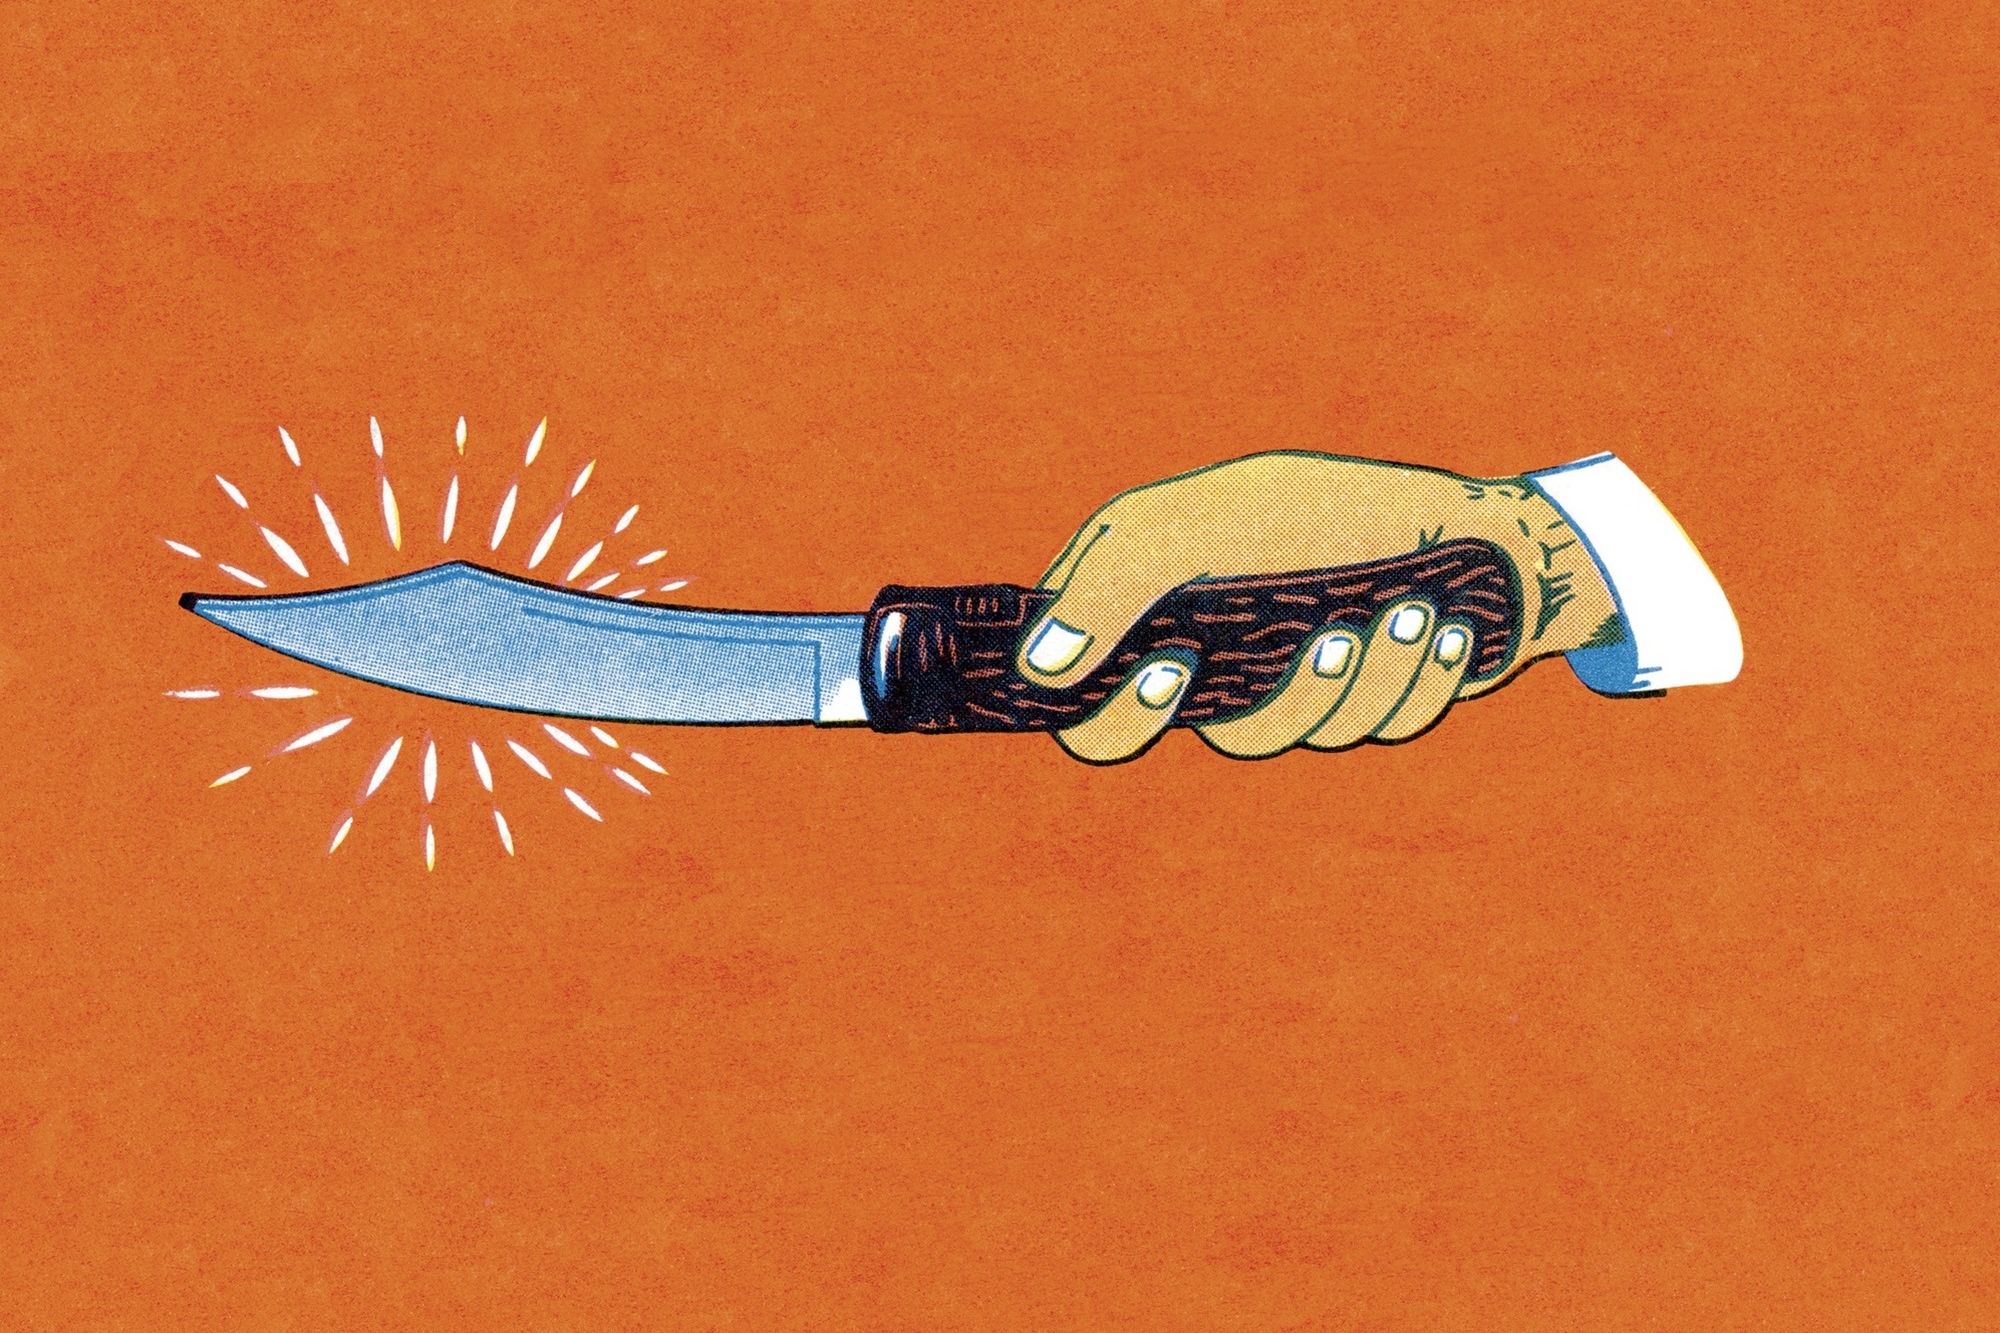 Take Control of Your Business by Treating It Like a Knife Fight